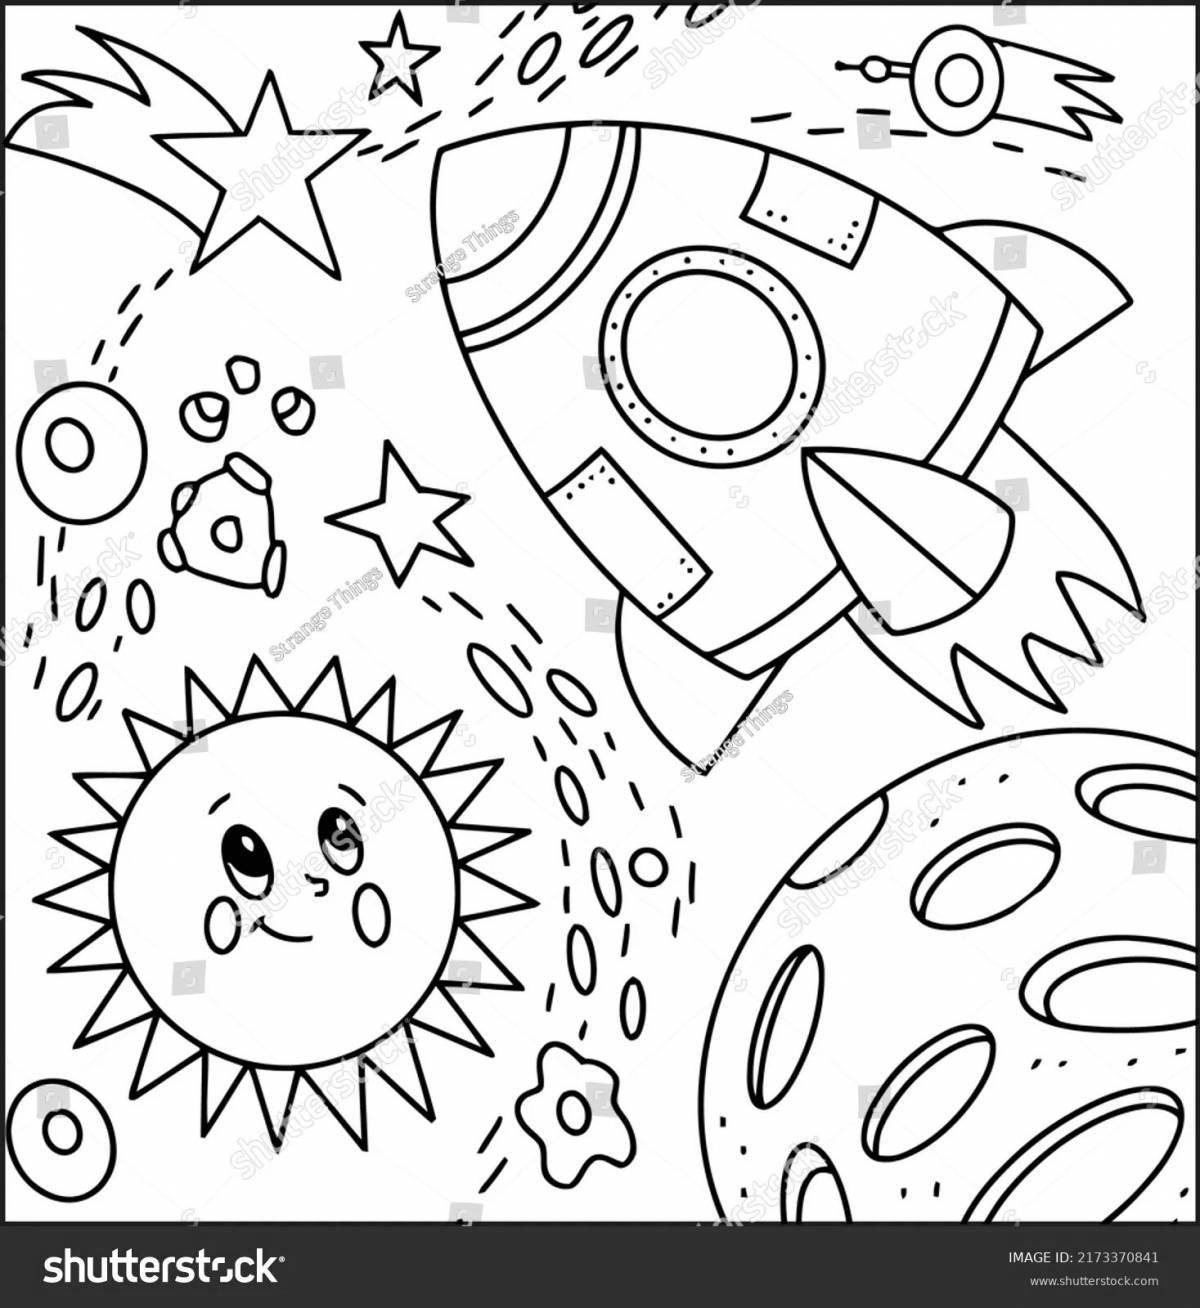 Brightly colored space city coloring page